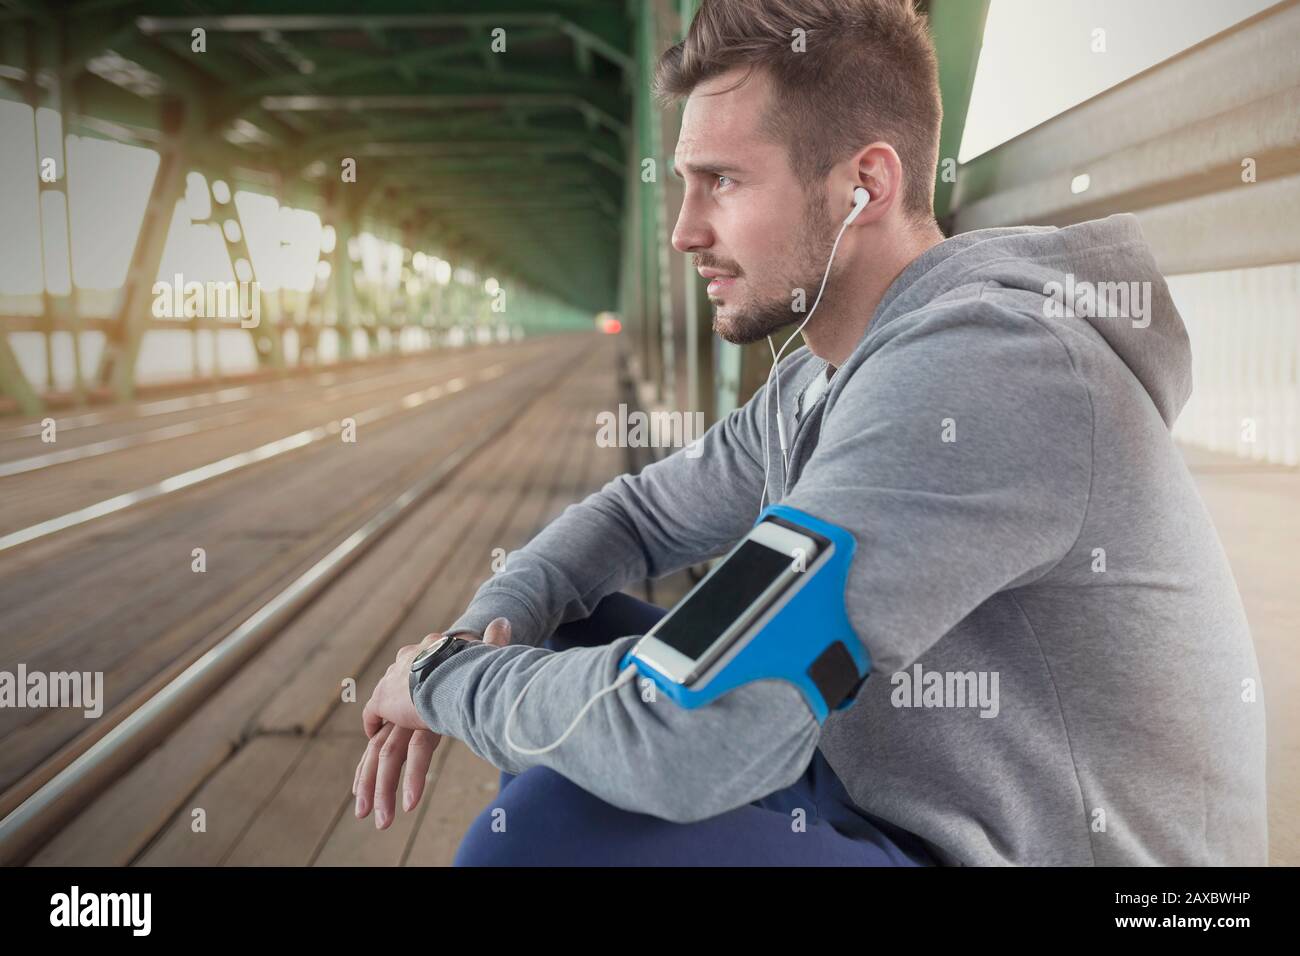 Young male runner resting, listening to music with headphones and mp3 player on train station platform Stock Photo